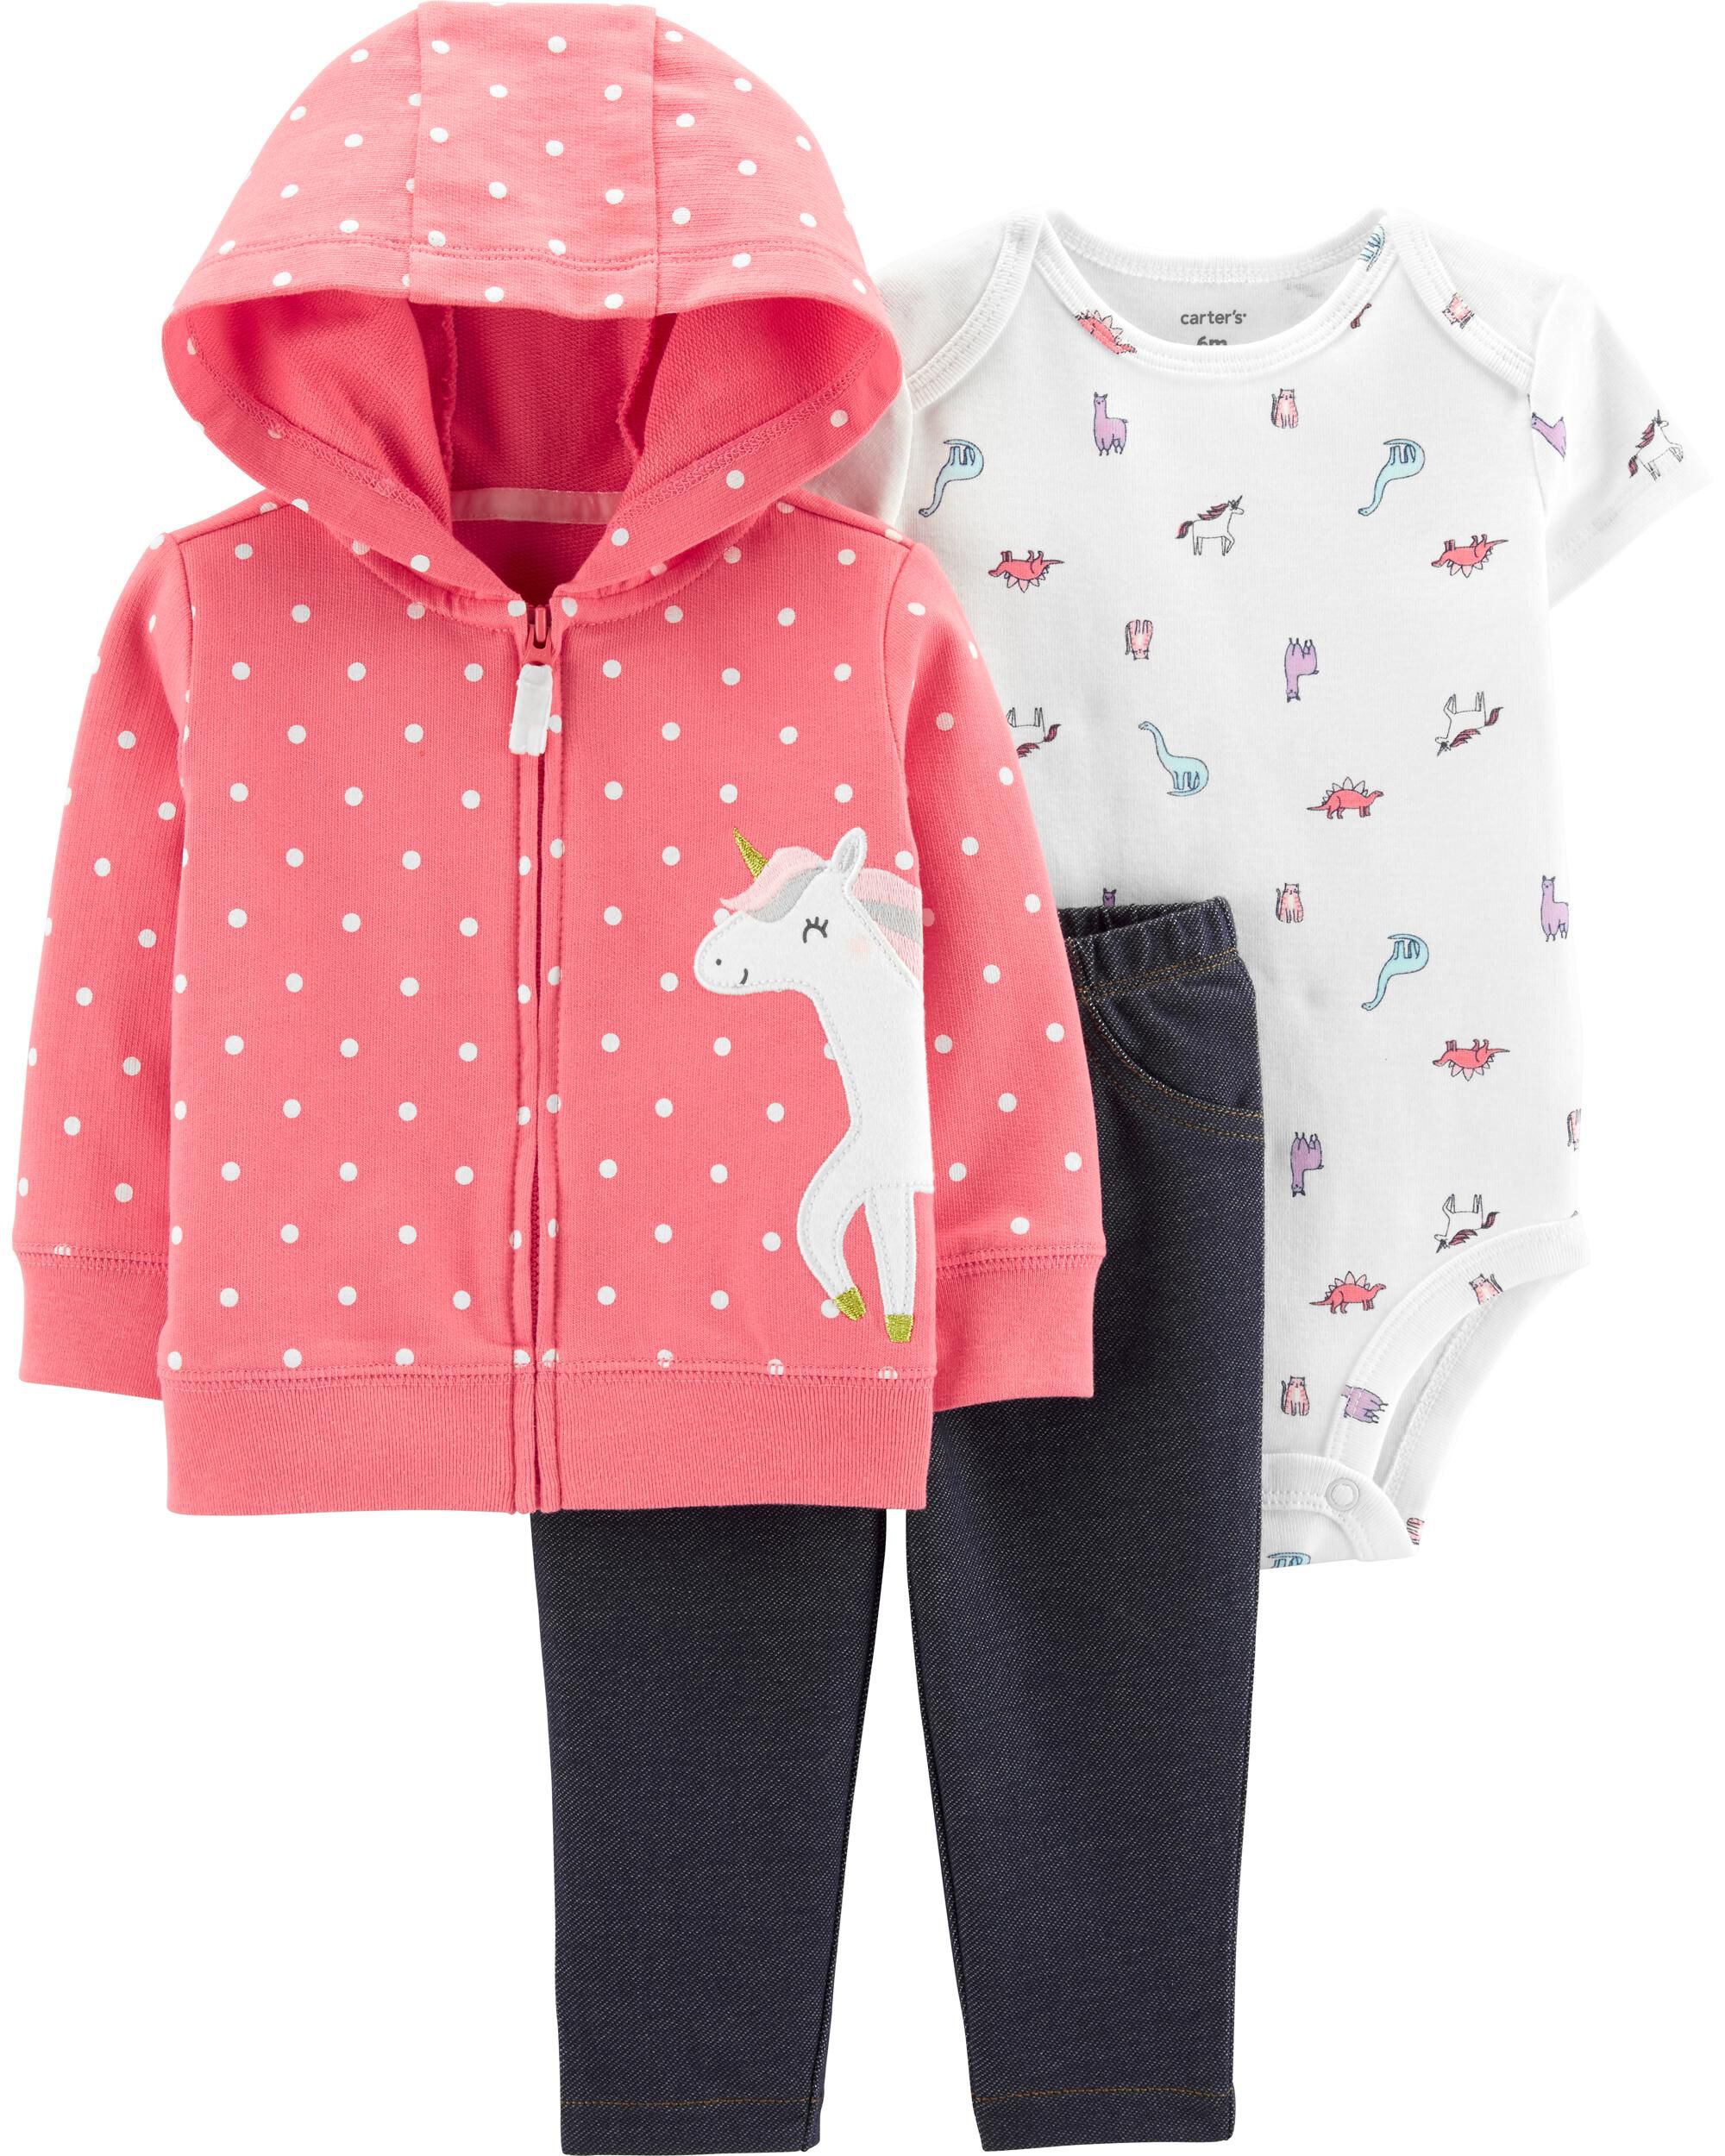 carters baby sets